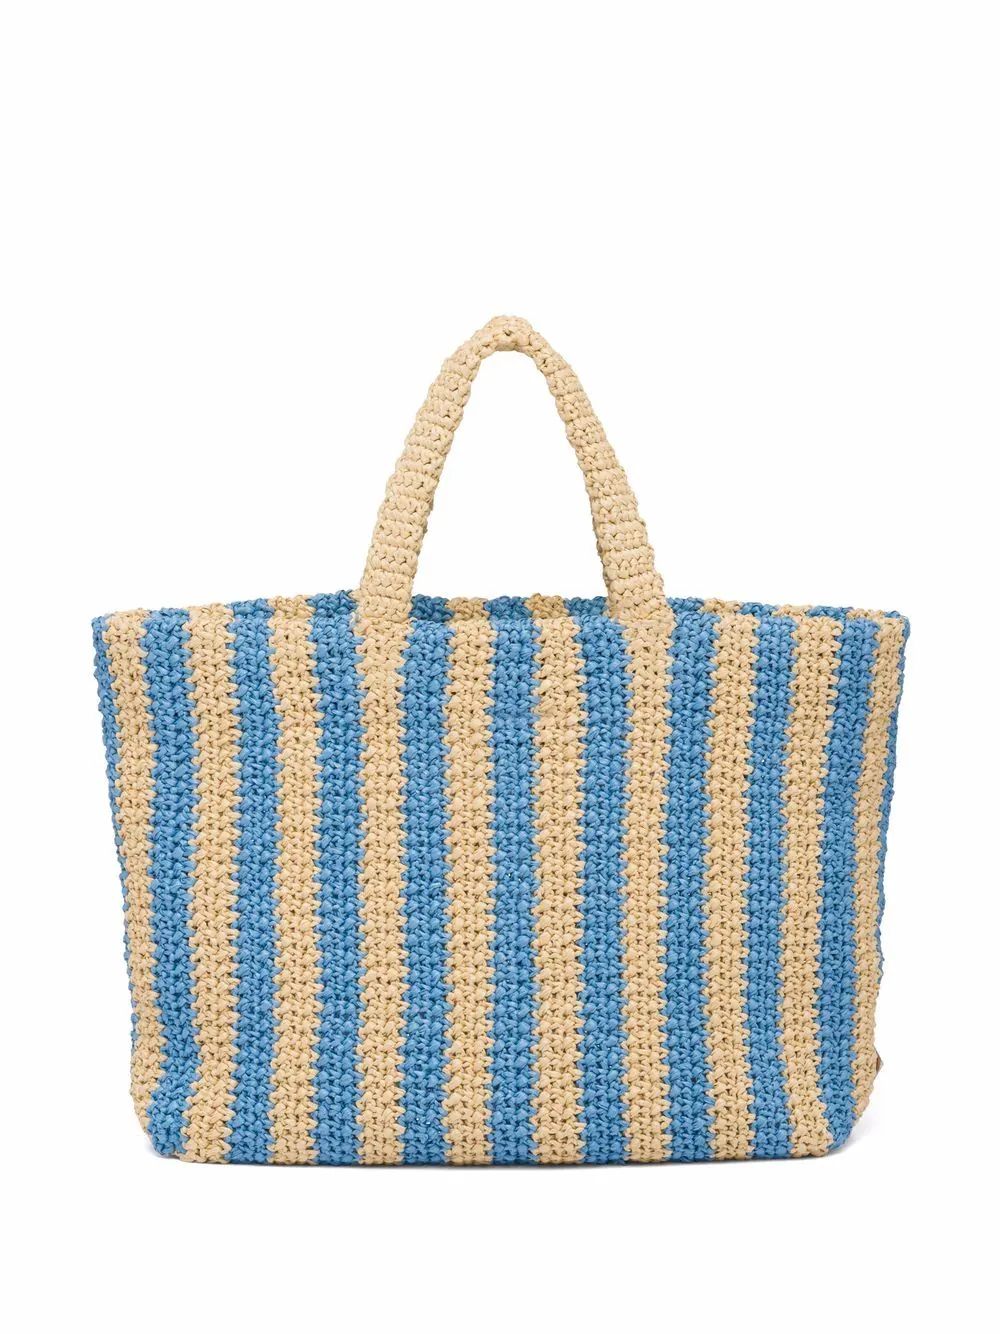 logo-embroidered straw tote bag | Farfetch Global